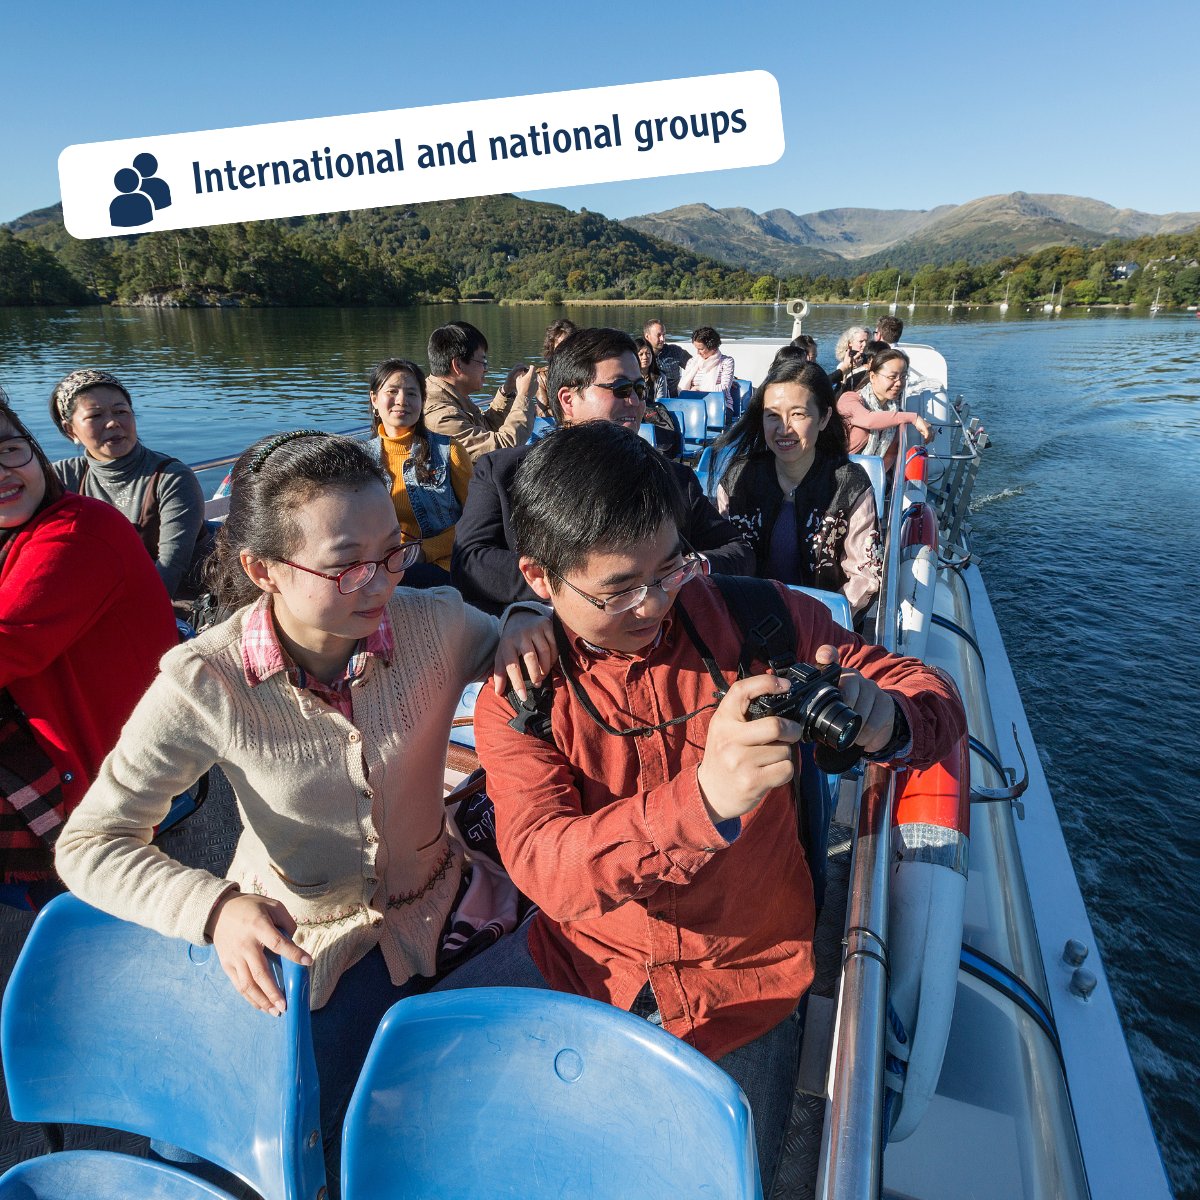 Great for Groups - plan your #Windermere adventure for 20+ people! All groups get: 🎫 Discount tickets for 20+ people 🚌 FREE Coach parking 🛳️ #Cruises to meet any time/budget ⭐10+ packages w/cruise & #attractions Plan your next group visit : ow.ly/1wtr50RuBQM